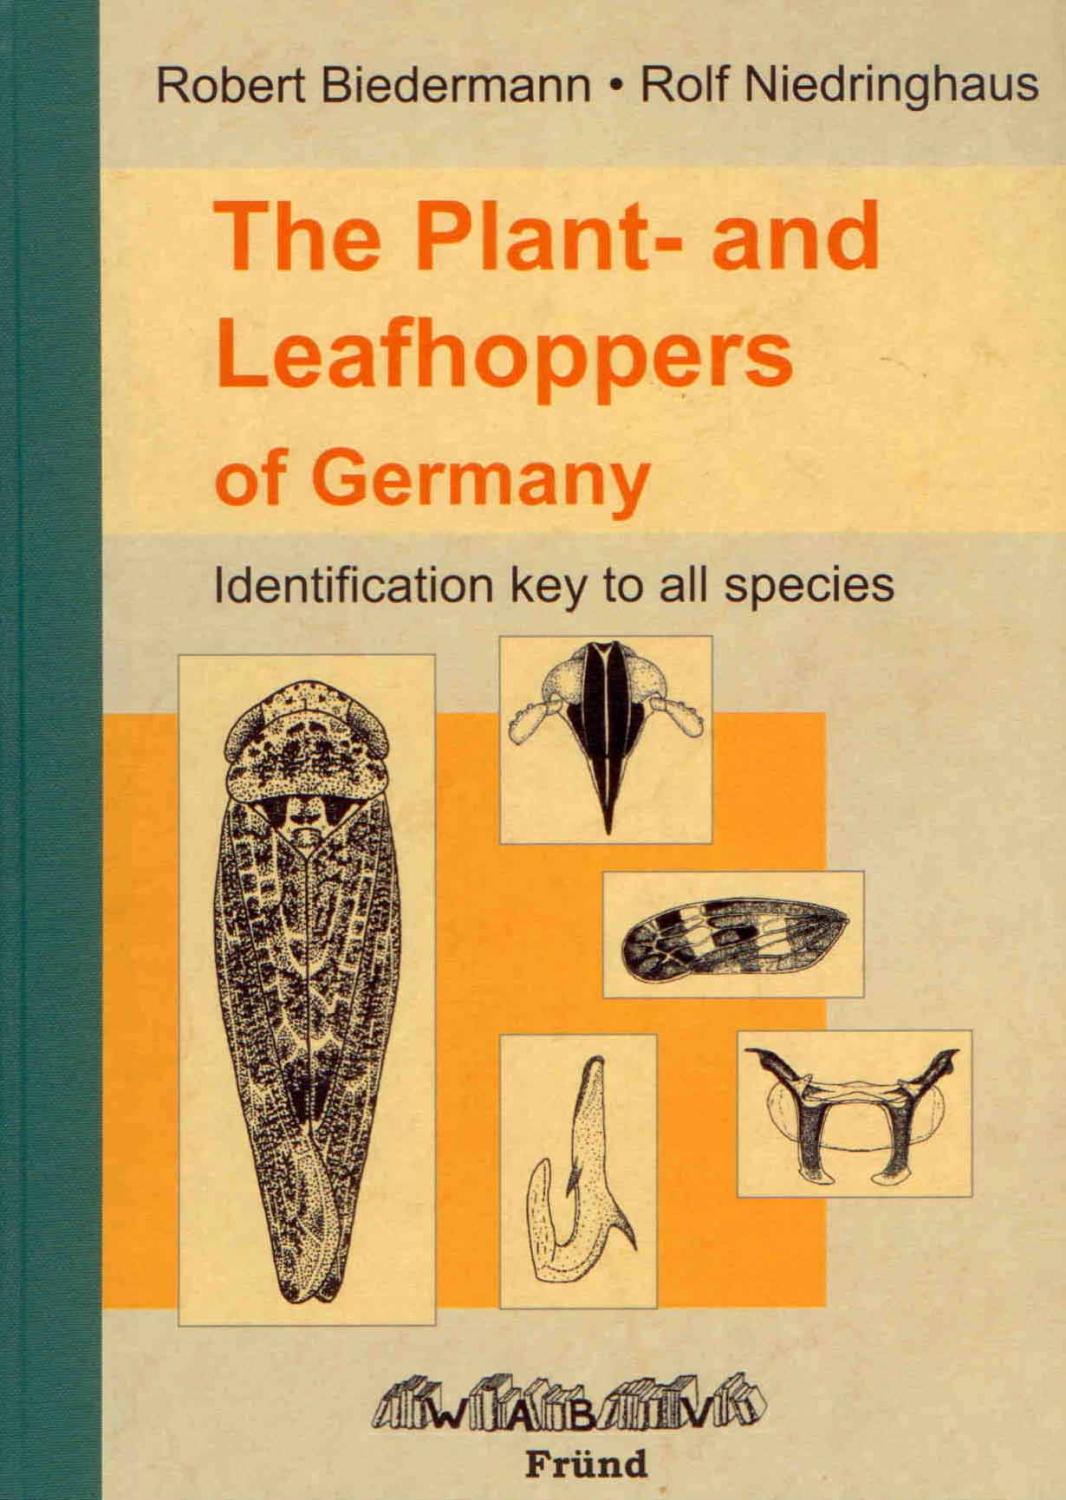 The Plant- and Leafhoppers of Germany Identification Keys for all species.